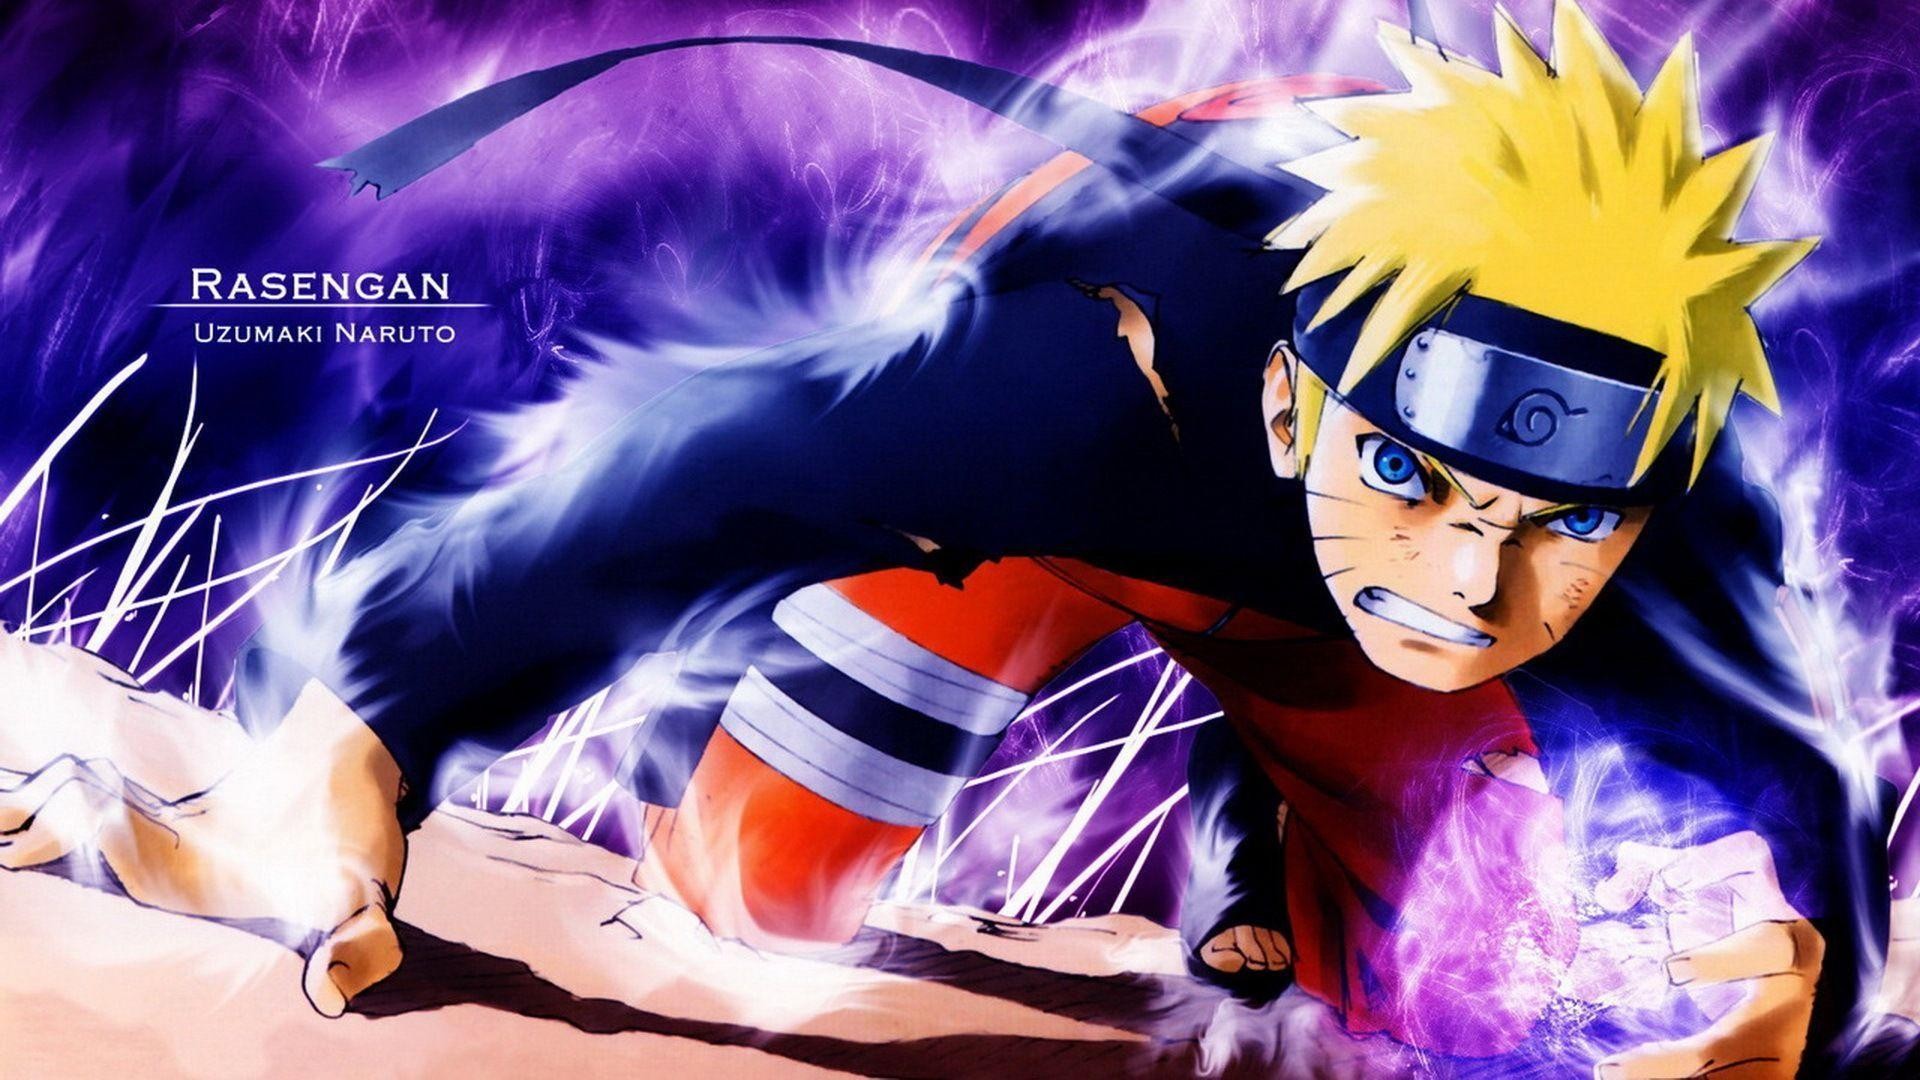 Naruto Wallpaper For Desktop with high-resolution 1920x1080 pixel. You can use this poster wallpaper for your Desktop Computers, Mac Screensavers, Windows Backgrounds, iPhone Wallpapers, Tablet or Android Lock screen and another Mobile device